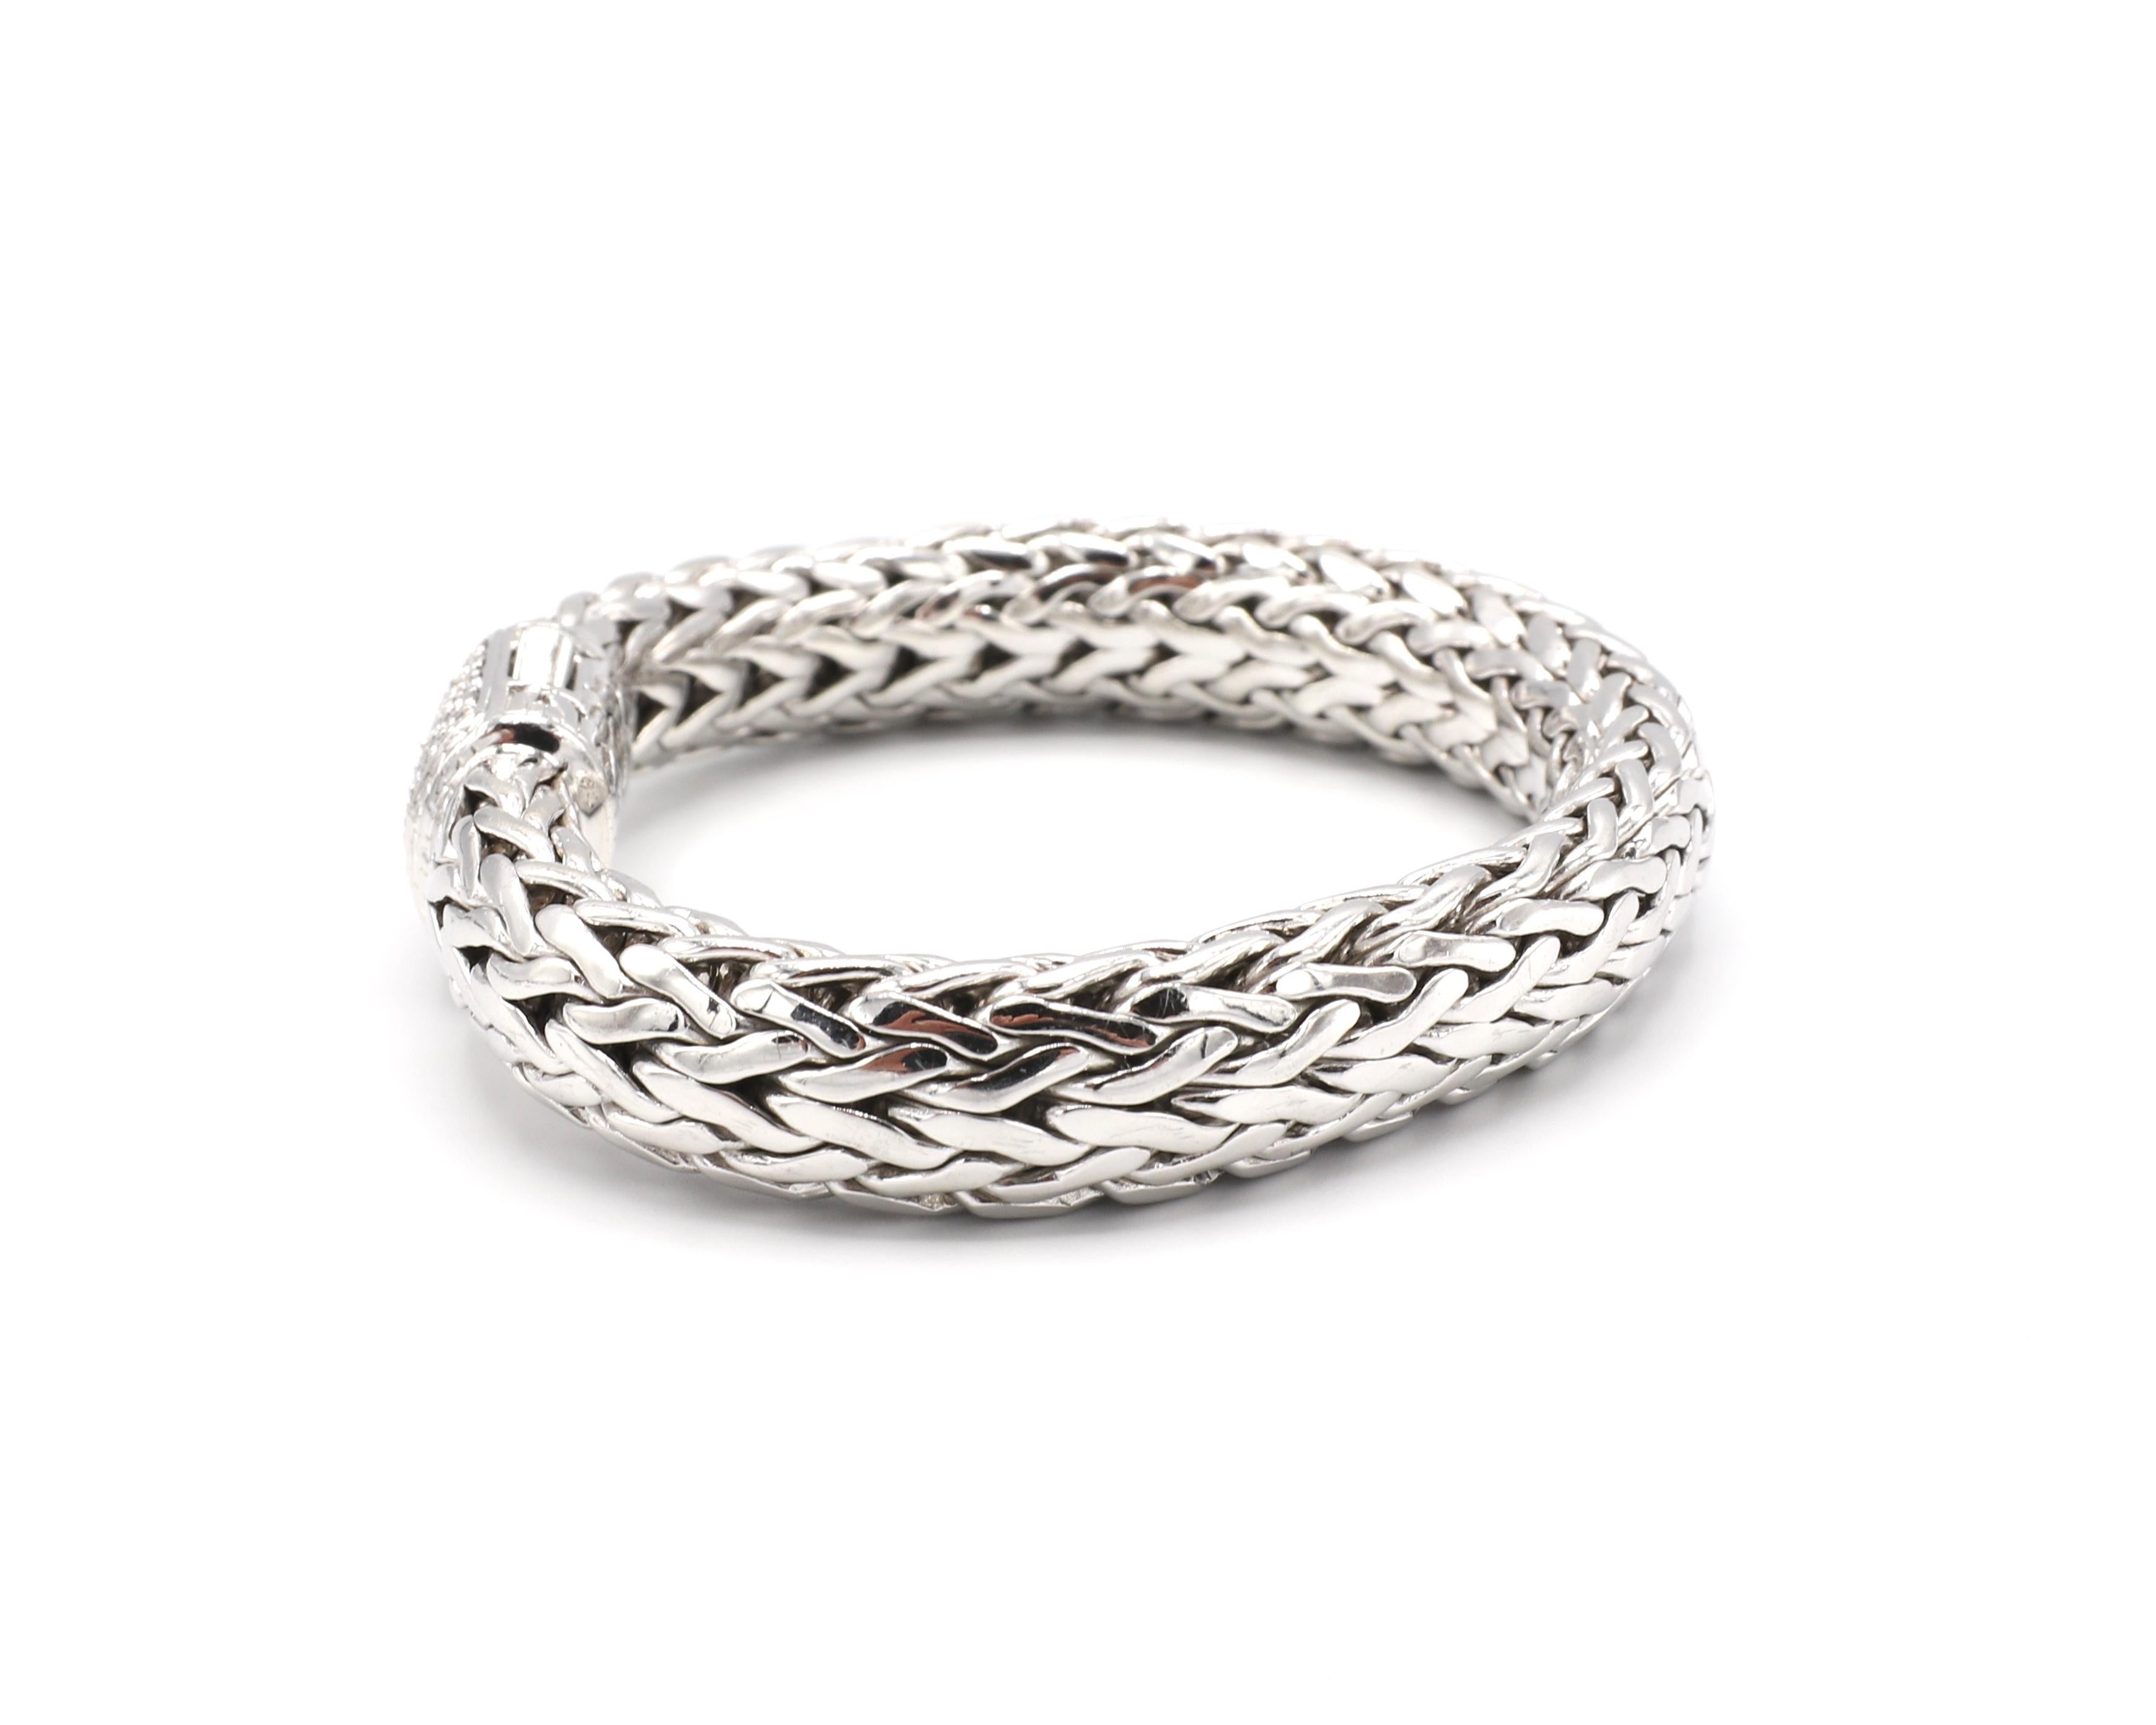 John Hardy Tiga Large Sterling Silver & 18K Gold Classic Chain Woven Diamond Bracelet 

Metal: Sterling silver & 18k gold
Weight: 86.8 grams
Diamonds: Approx. 0.65 CTW G VS
Length: 8 inches
Width: Approx. 10.5mm, clasp is approx. 13.2mm wide